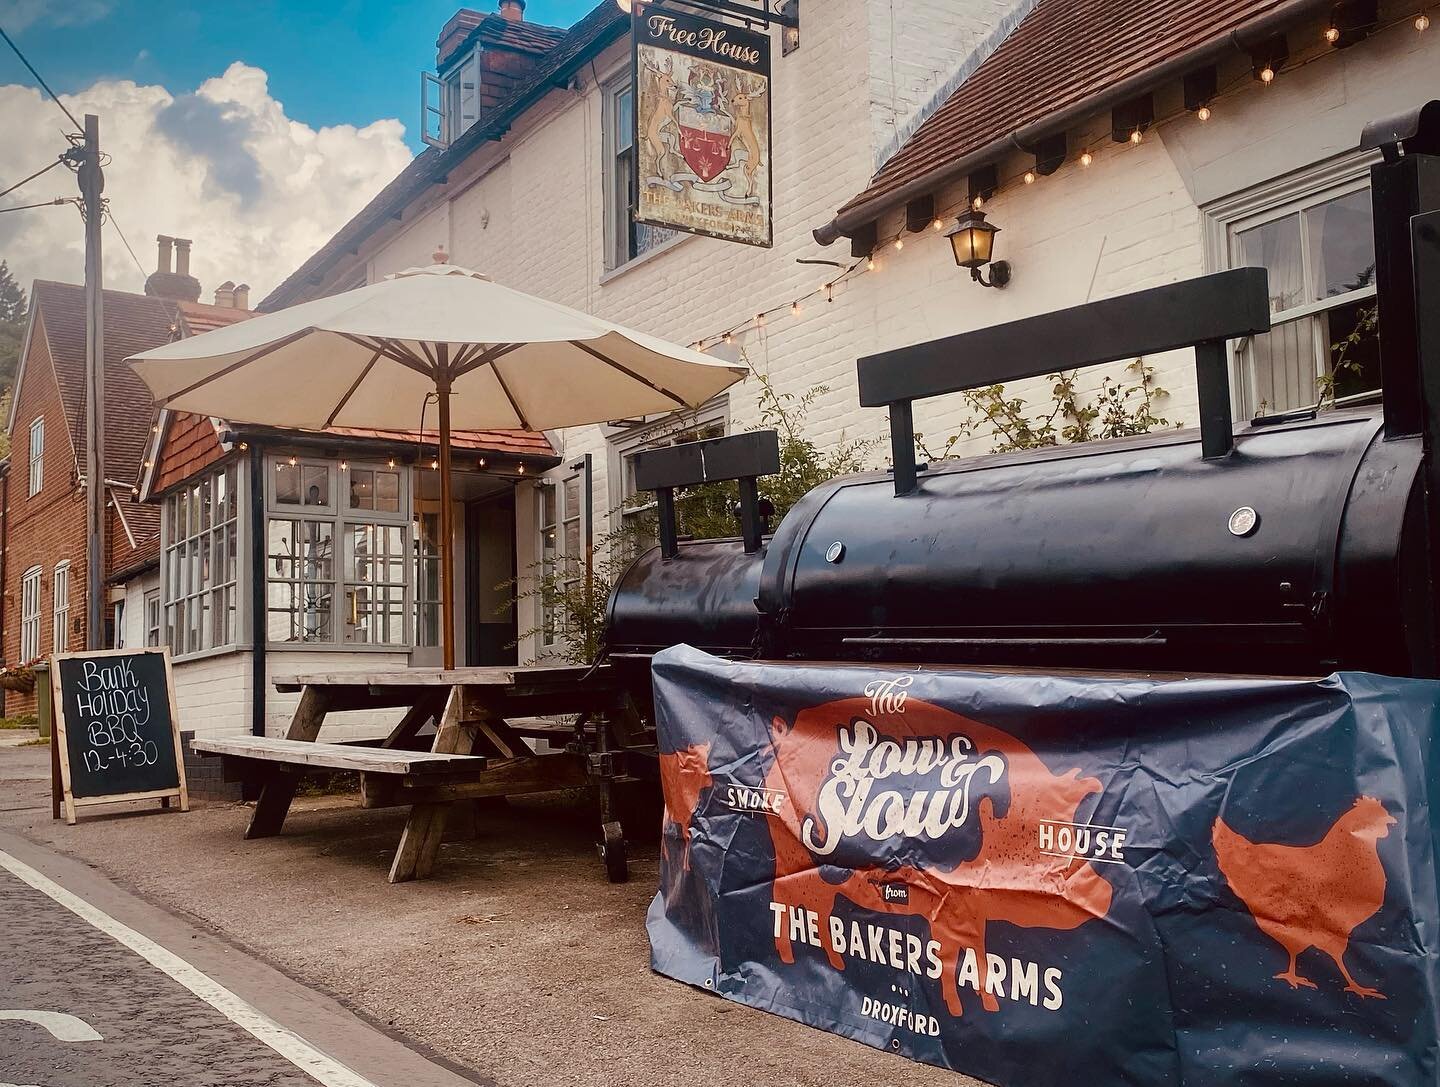 Getting ready for our last big BBQ of the year! So why not come and enjoy one of our big boxes, stacked brioche buns or some loaded fries, alongside a nice cold beverage of your choice! 🥩🌽🎣🍹🍻🌞

#thebakersarmsdroxford #hampshirefayre #meonvalley